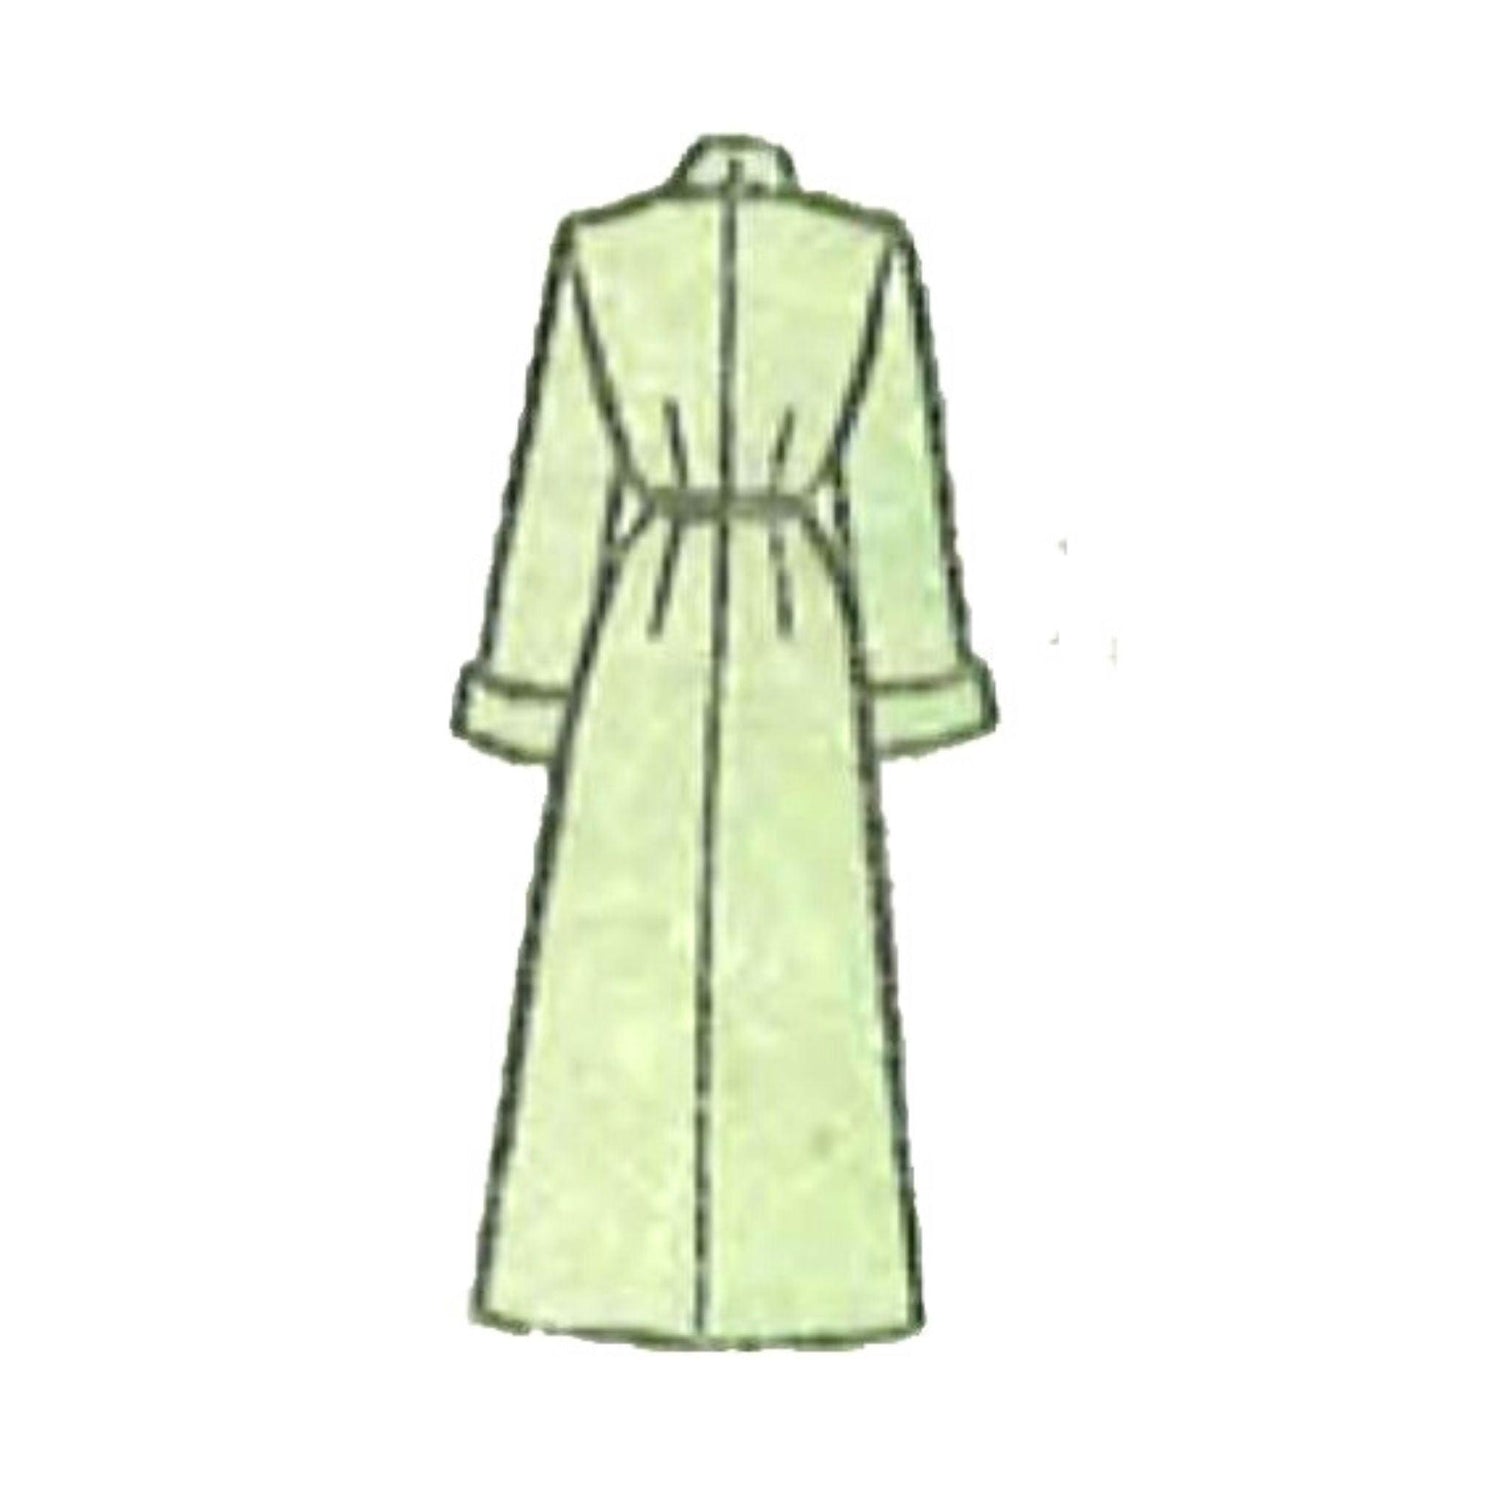 PDF - Vintage 1940s Pattern, Women's Dressing Gown Robe, Housecoat - Instantly Print at Home - Vintage Sewing Pattern Company